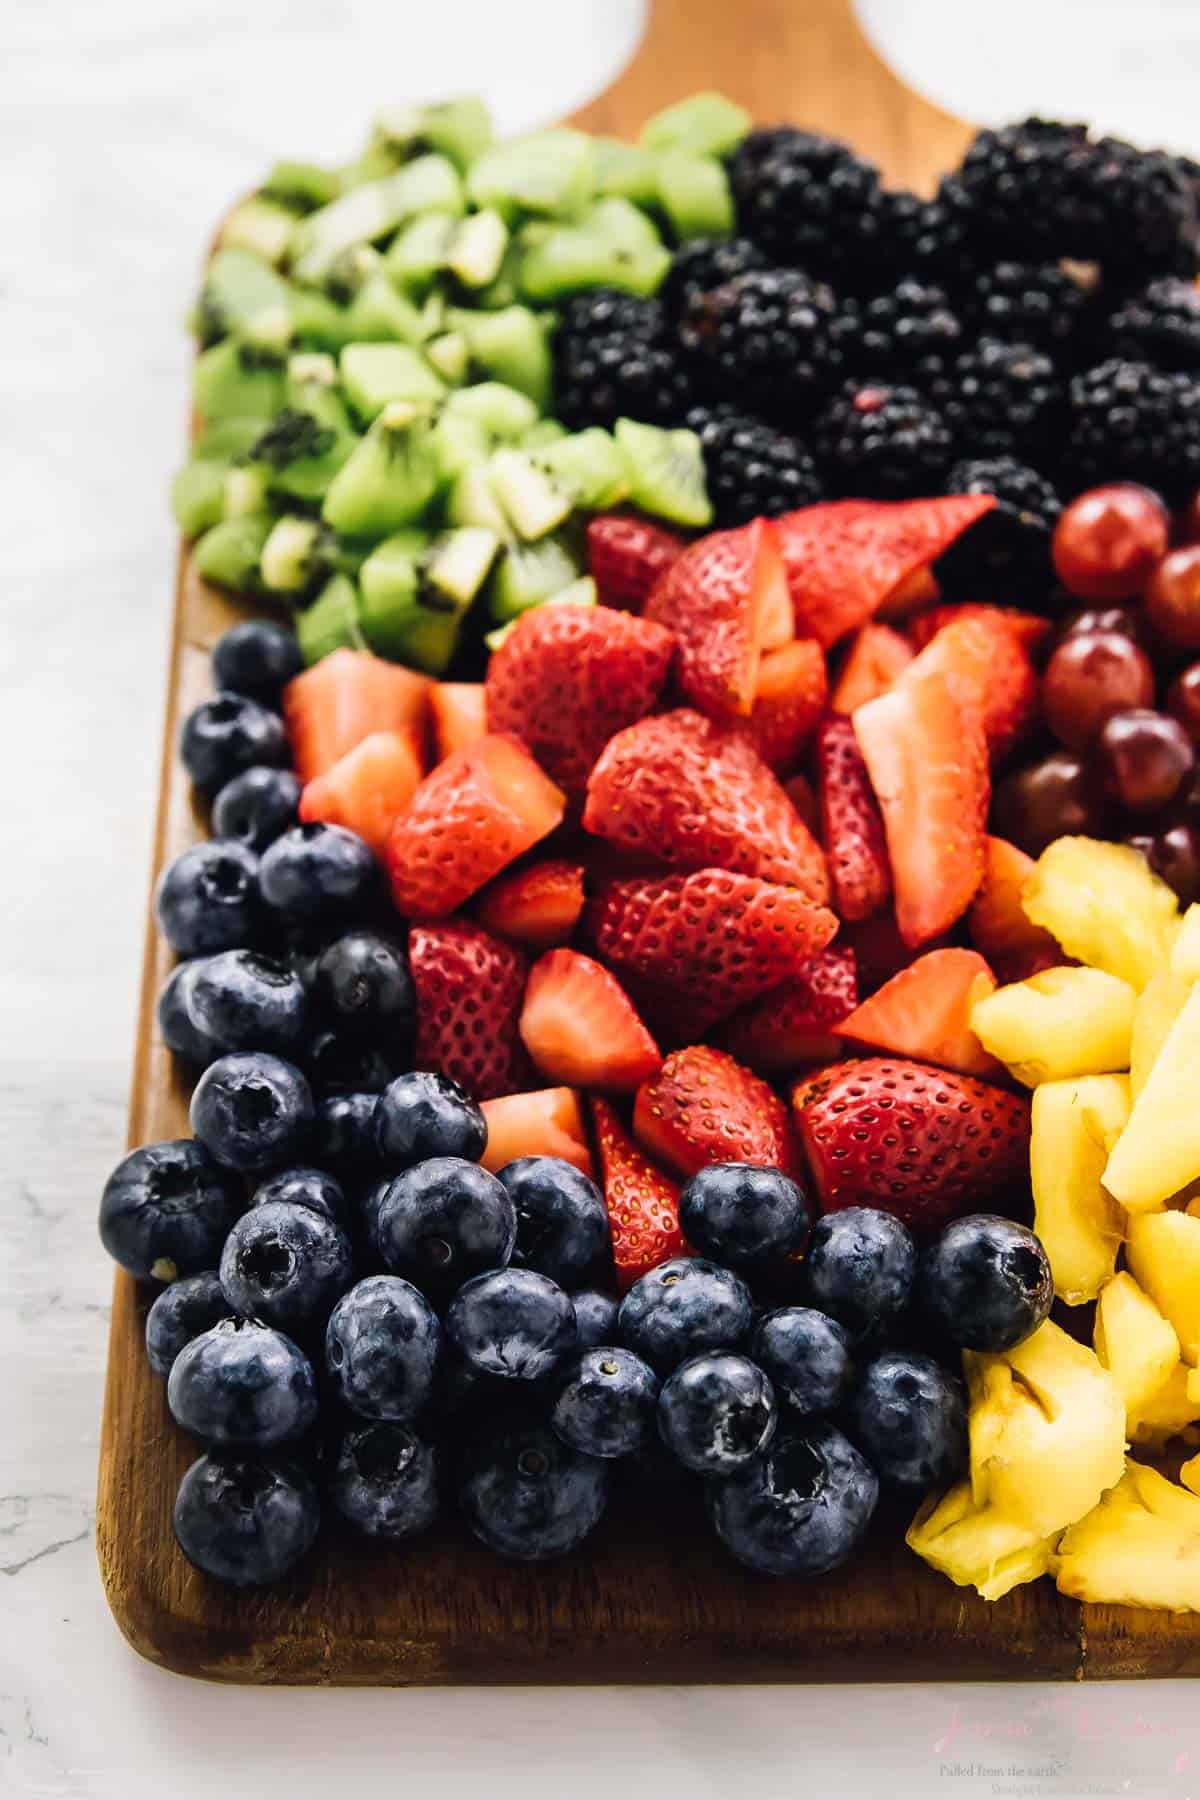 Chopped strawberries, kiwi, grapes, pineapple and blackberries on a wooden board. 